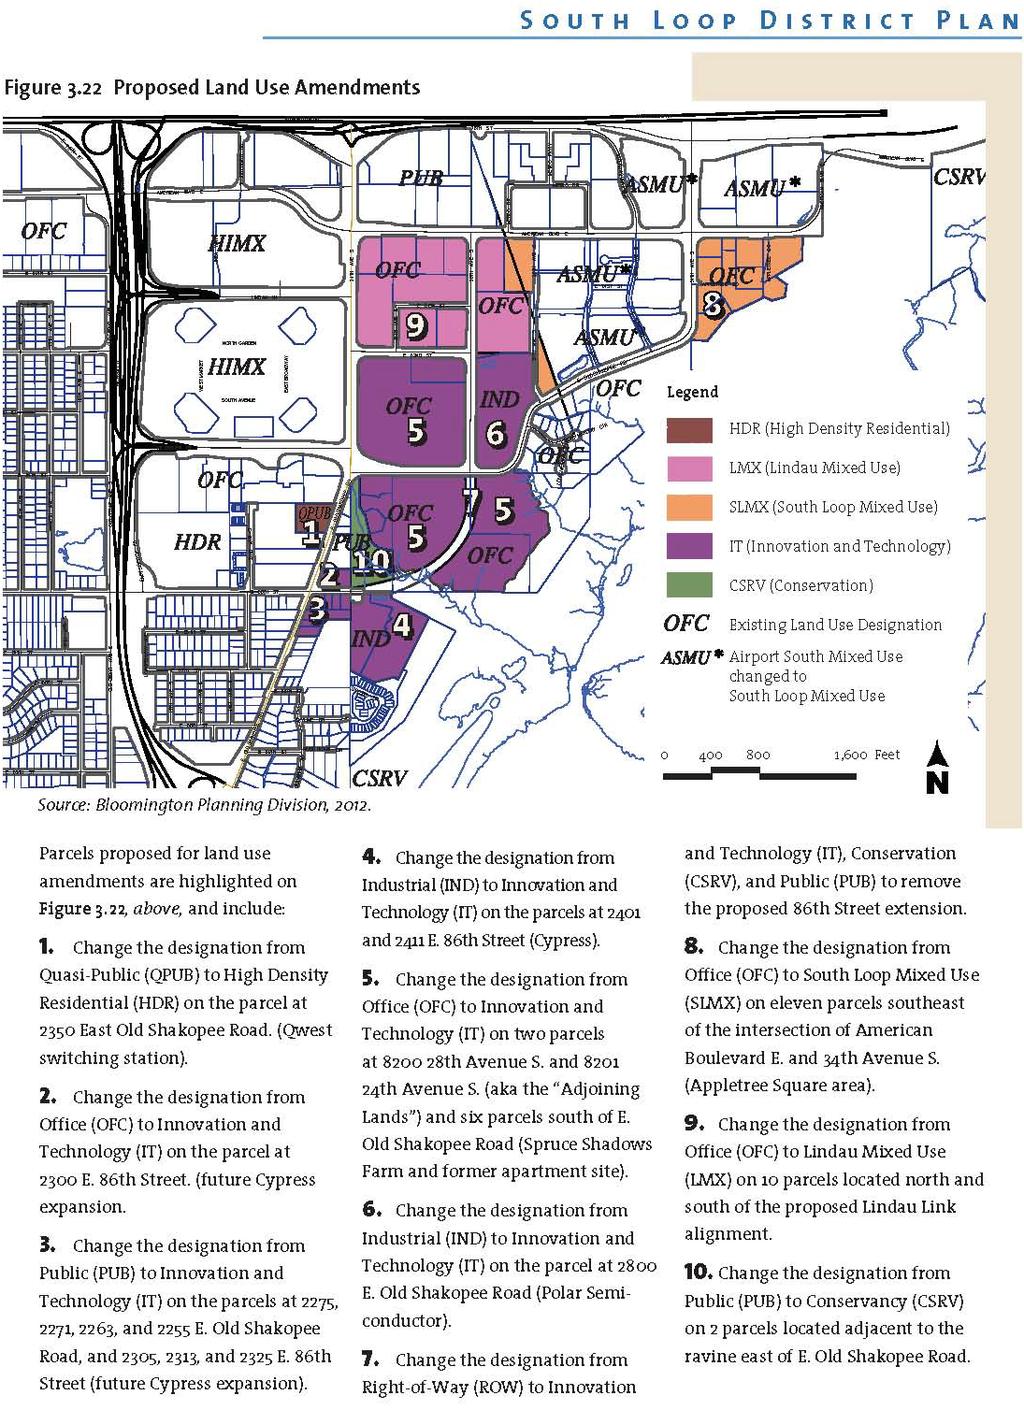 Figure 2: South Loop District - Proposed Planned Land Use Changes From